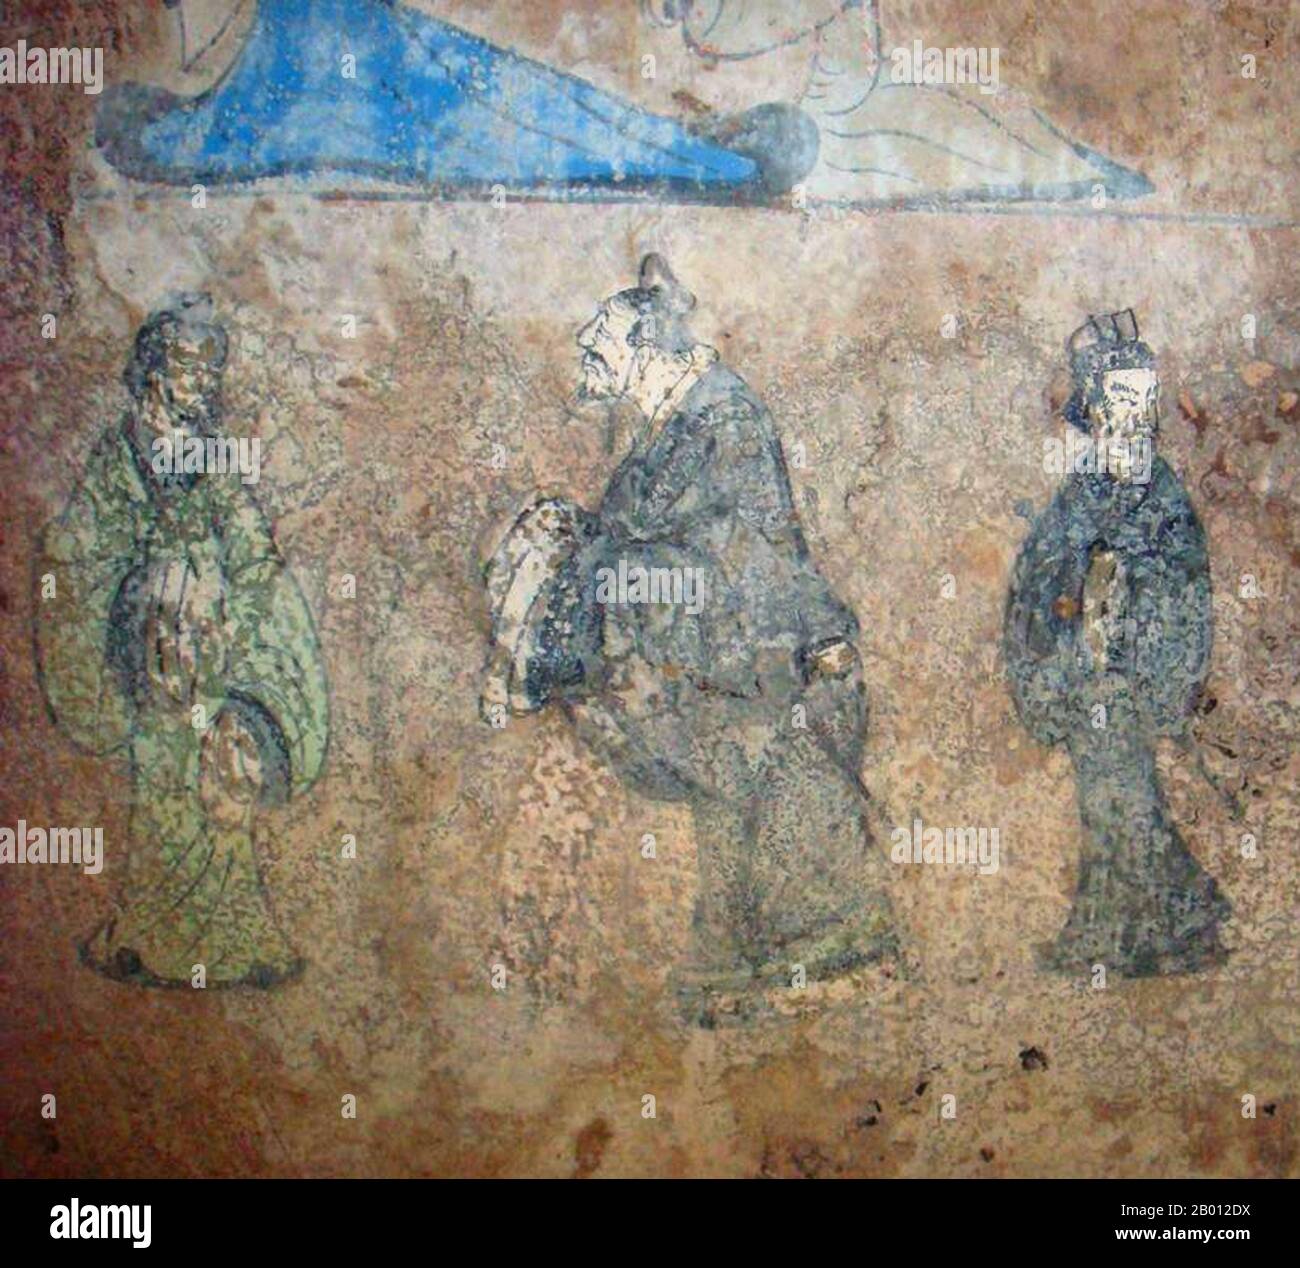 China: Laozi (Lao Tzu, c. 6th century BCE, left), meeting with Confucius (Kong Zi, K'ung-tzu, K'ung-fu-tzu, 551– 479 BCE) in a Han Dynasty (206 BCE– 220 CE) fresco from Dongping County, Shandong Province.  The fresco, painted with blue, green, black and red colours is found on the walls of a tomb at an old residential yard in Dongping county, southwestern Shandong, and is estimated to be about 2,000 years old. Stock Photo